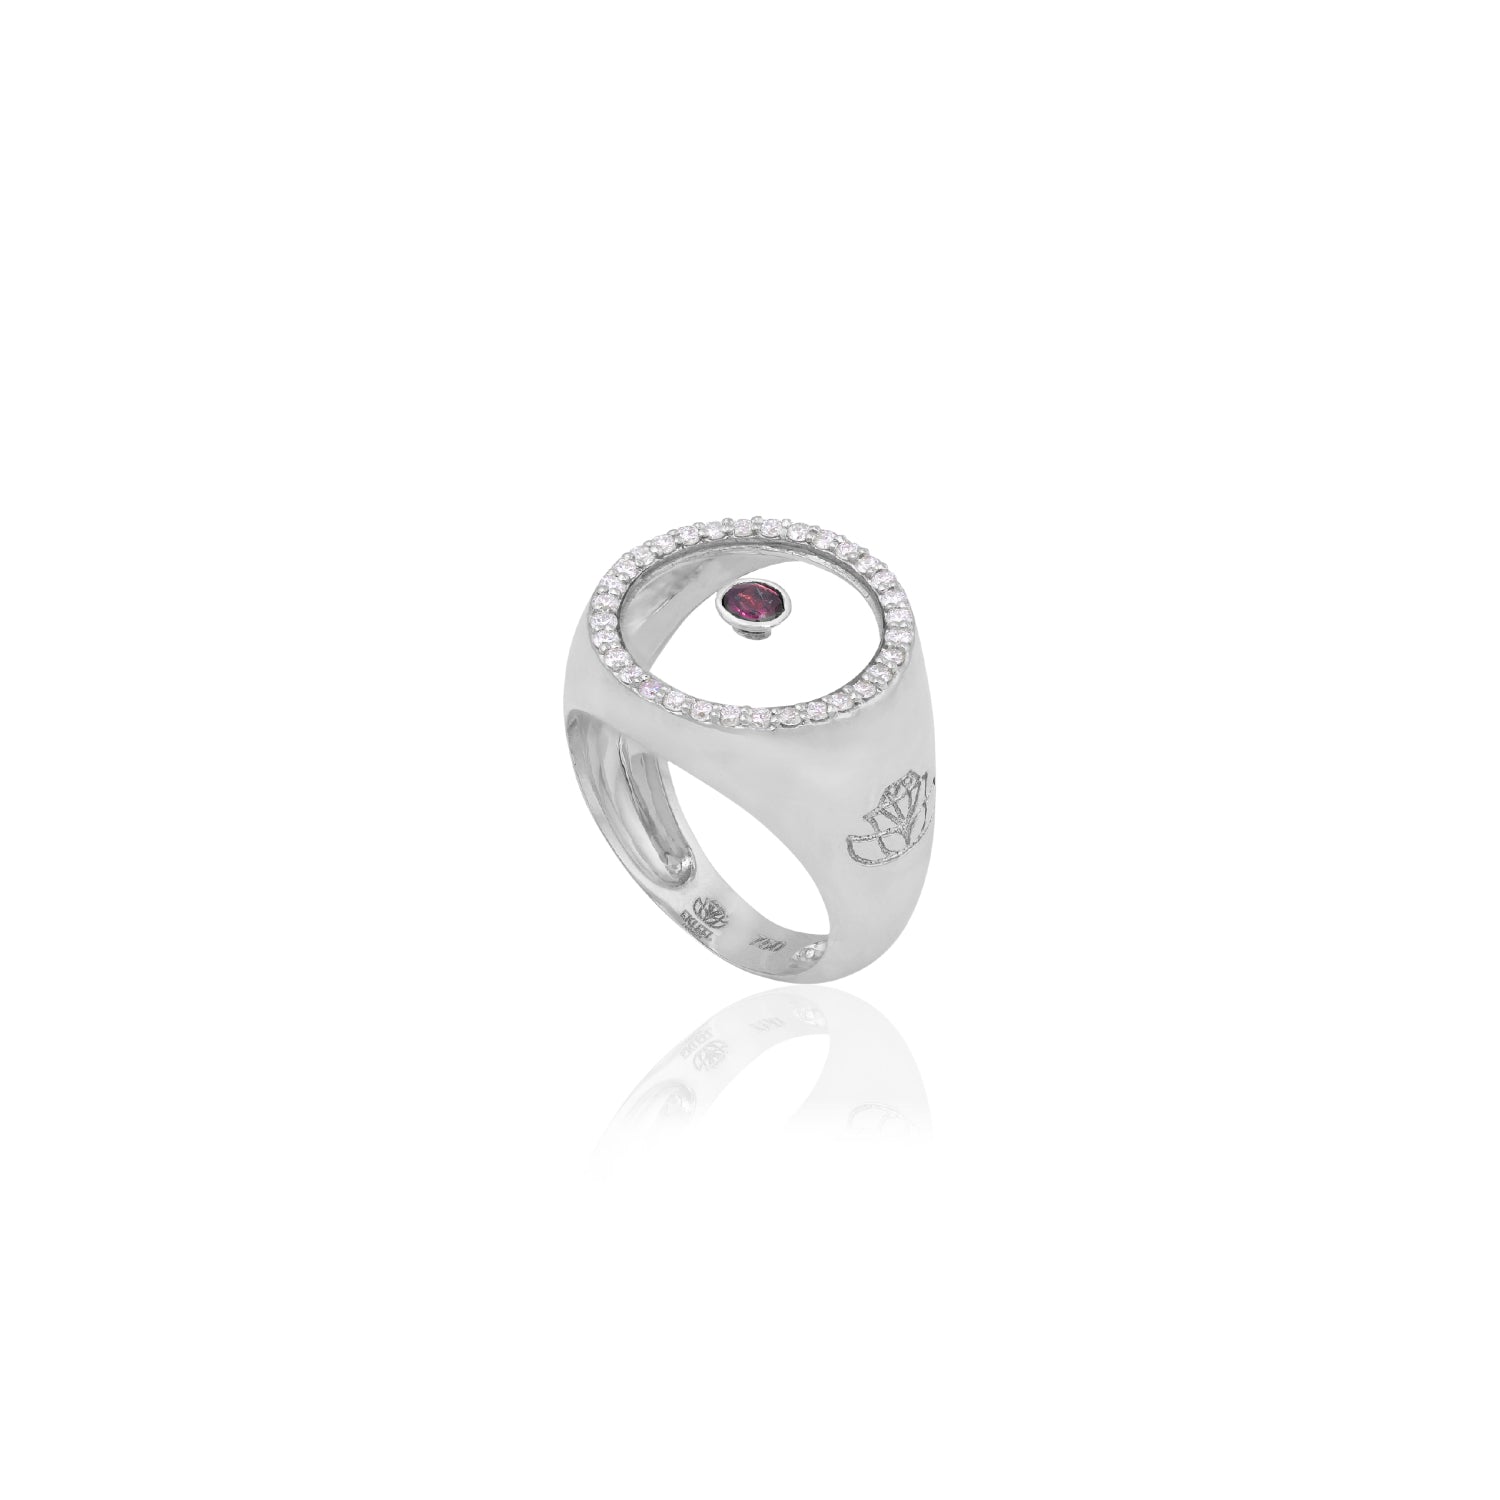 Tourmaline October Birthstone Ring in White Gold